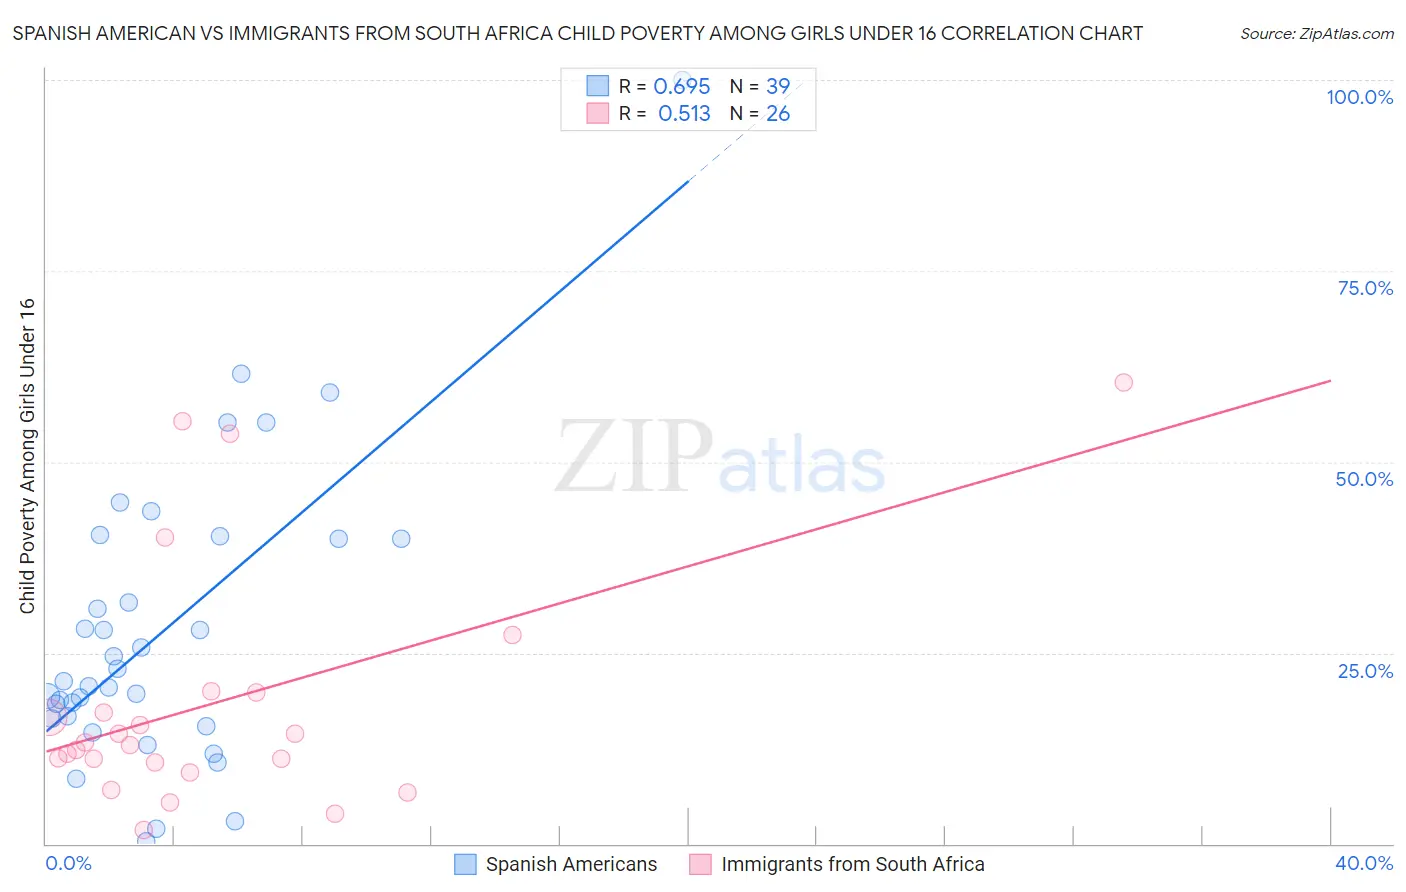 Spanish American vs Immigrants from South Africa Child Poverty Among Girls Under 16